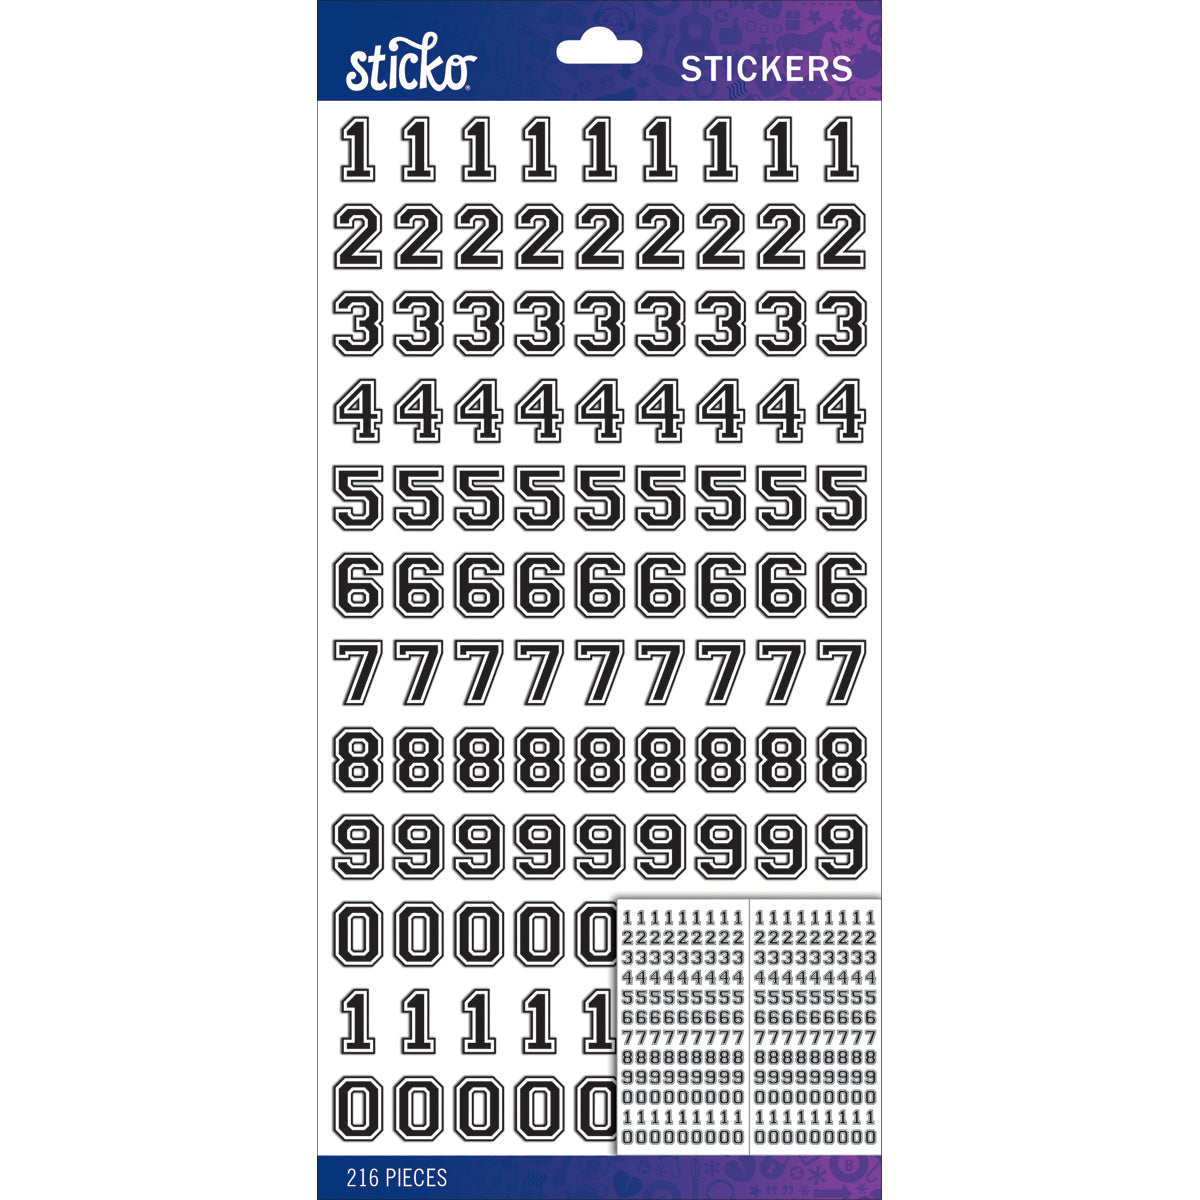 6 Pack Sticko Alphabet Stickers-Black Dot Numbers Small 5290314 -  GettyCrafts